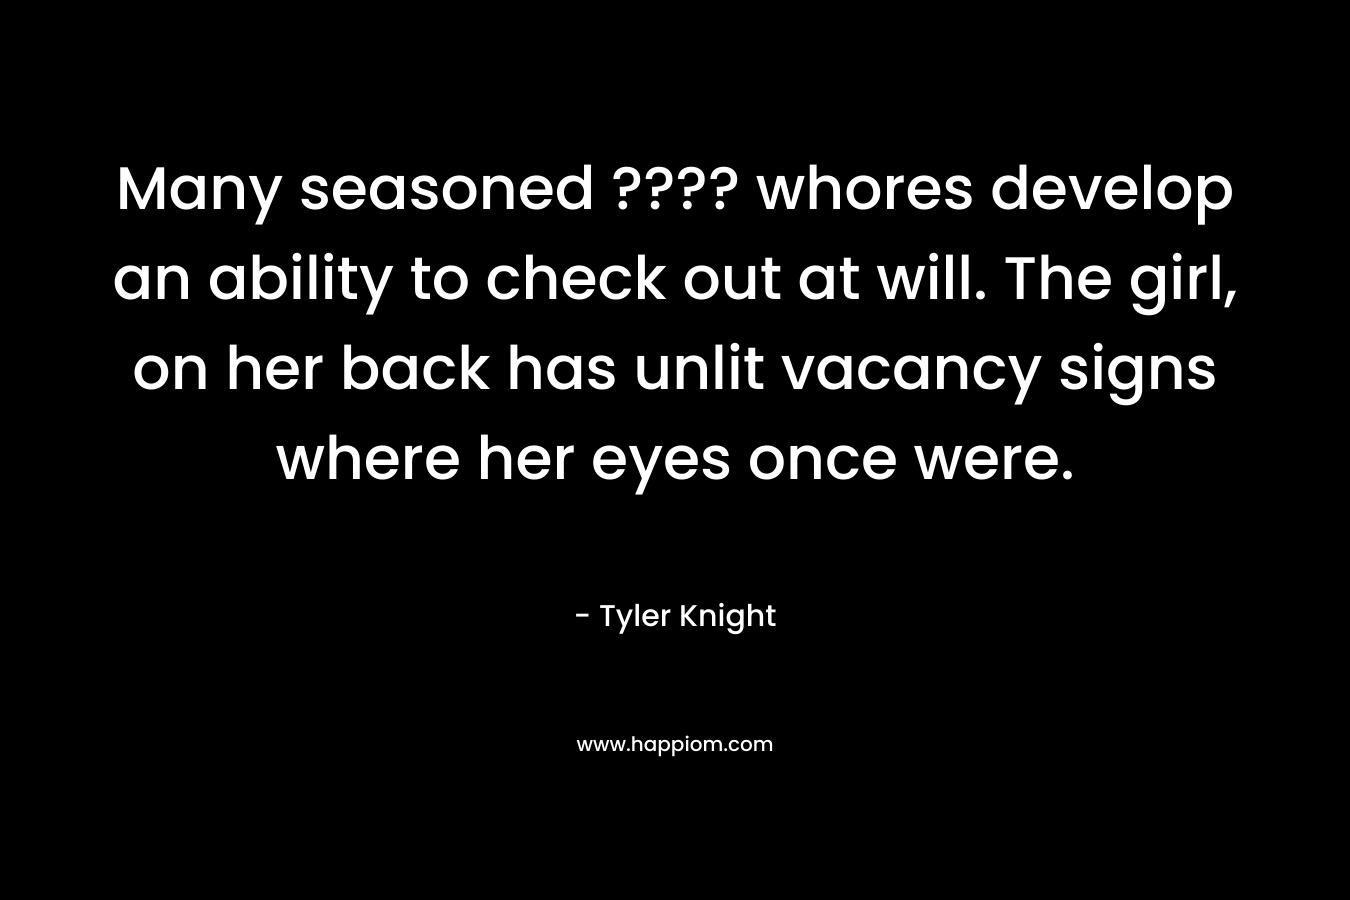 Many seasoned ???? whores develop an ability to check out at will. The girl, on her back has unlit vacancy signs where her eyes once were. – Tyler Knight